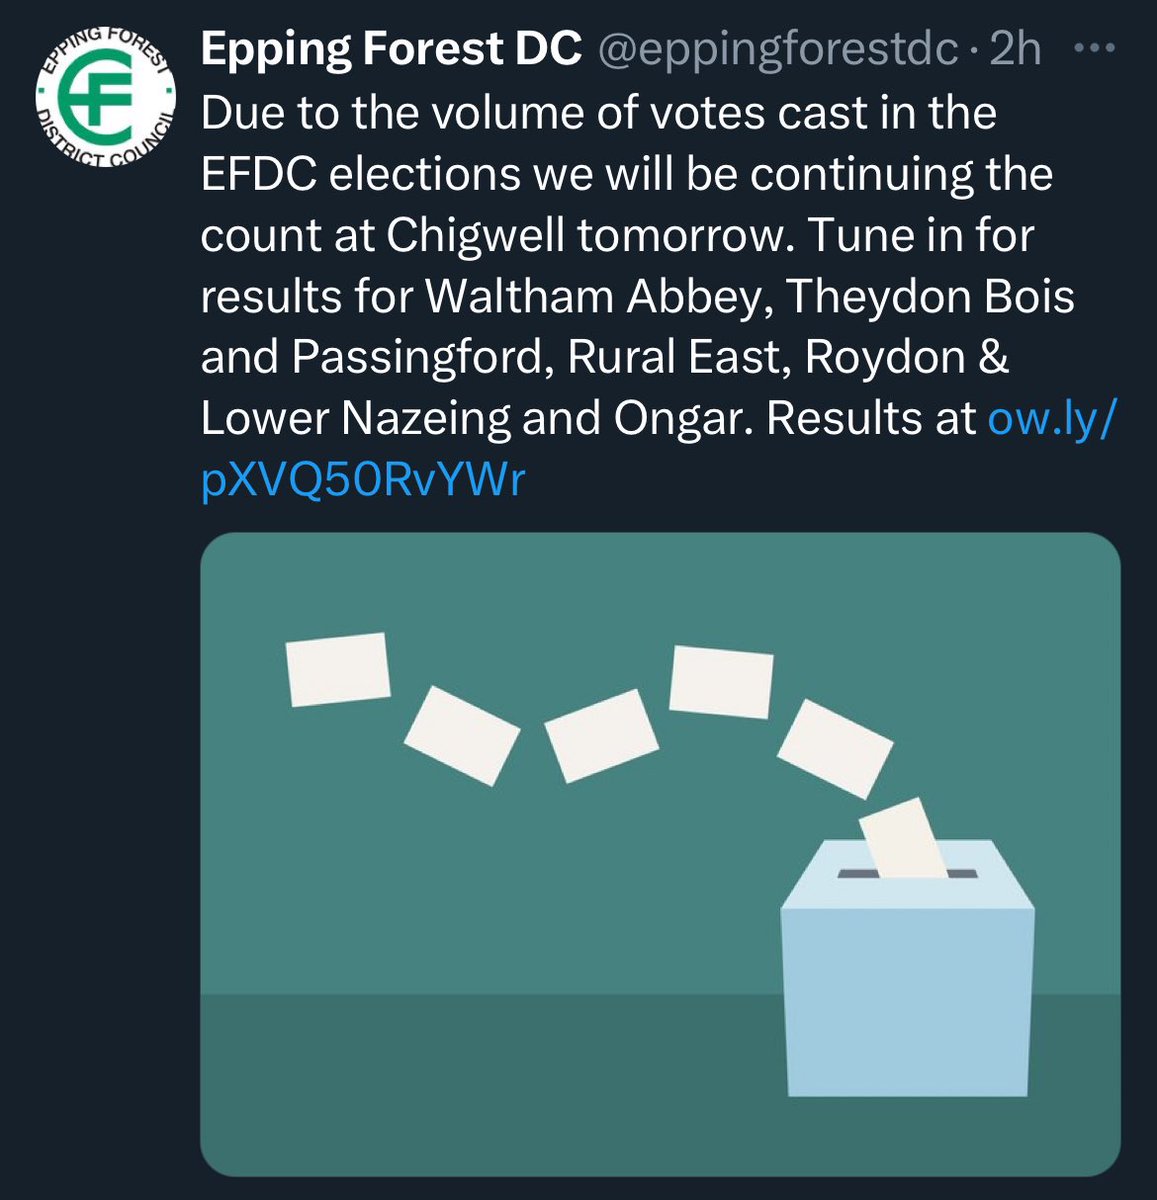 Seems Epping Forest has stopped the count this evening due to the number of ballots. So no result expected tonight